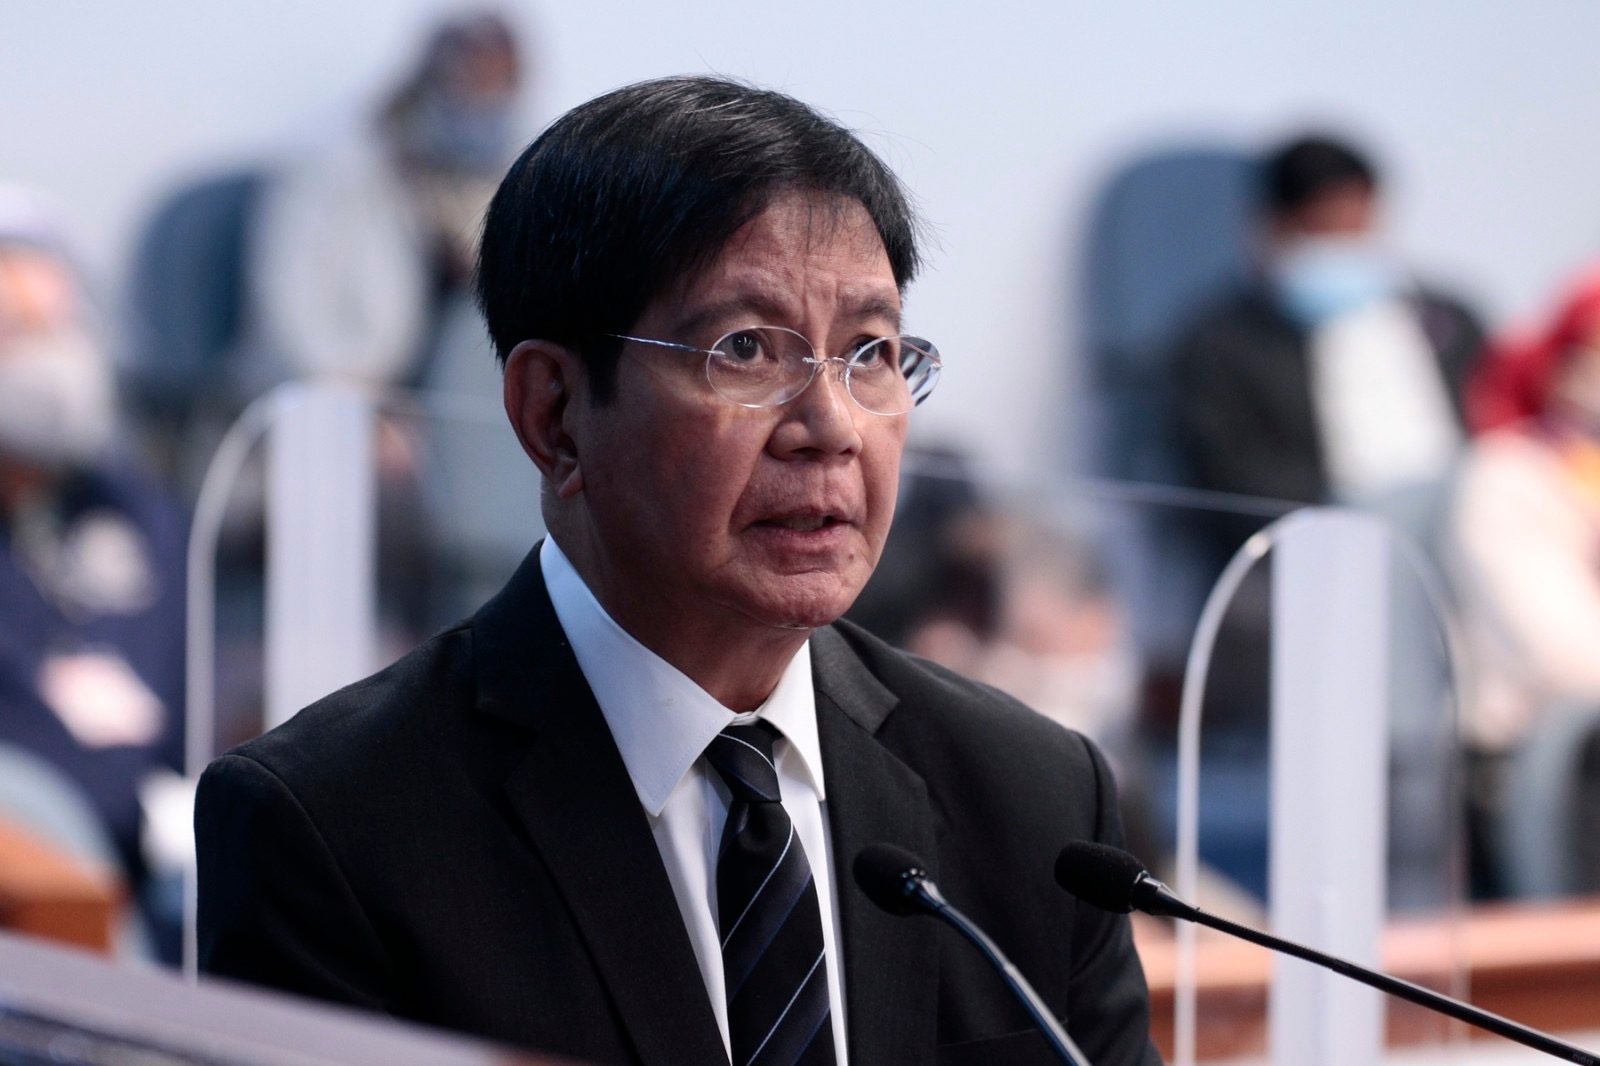 Lacson tells business groups internships should be paid